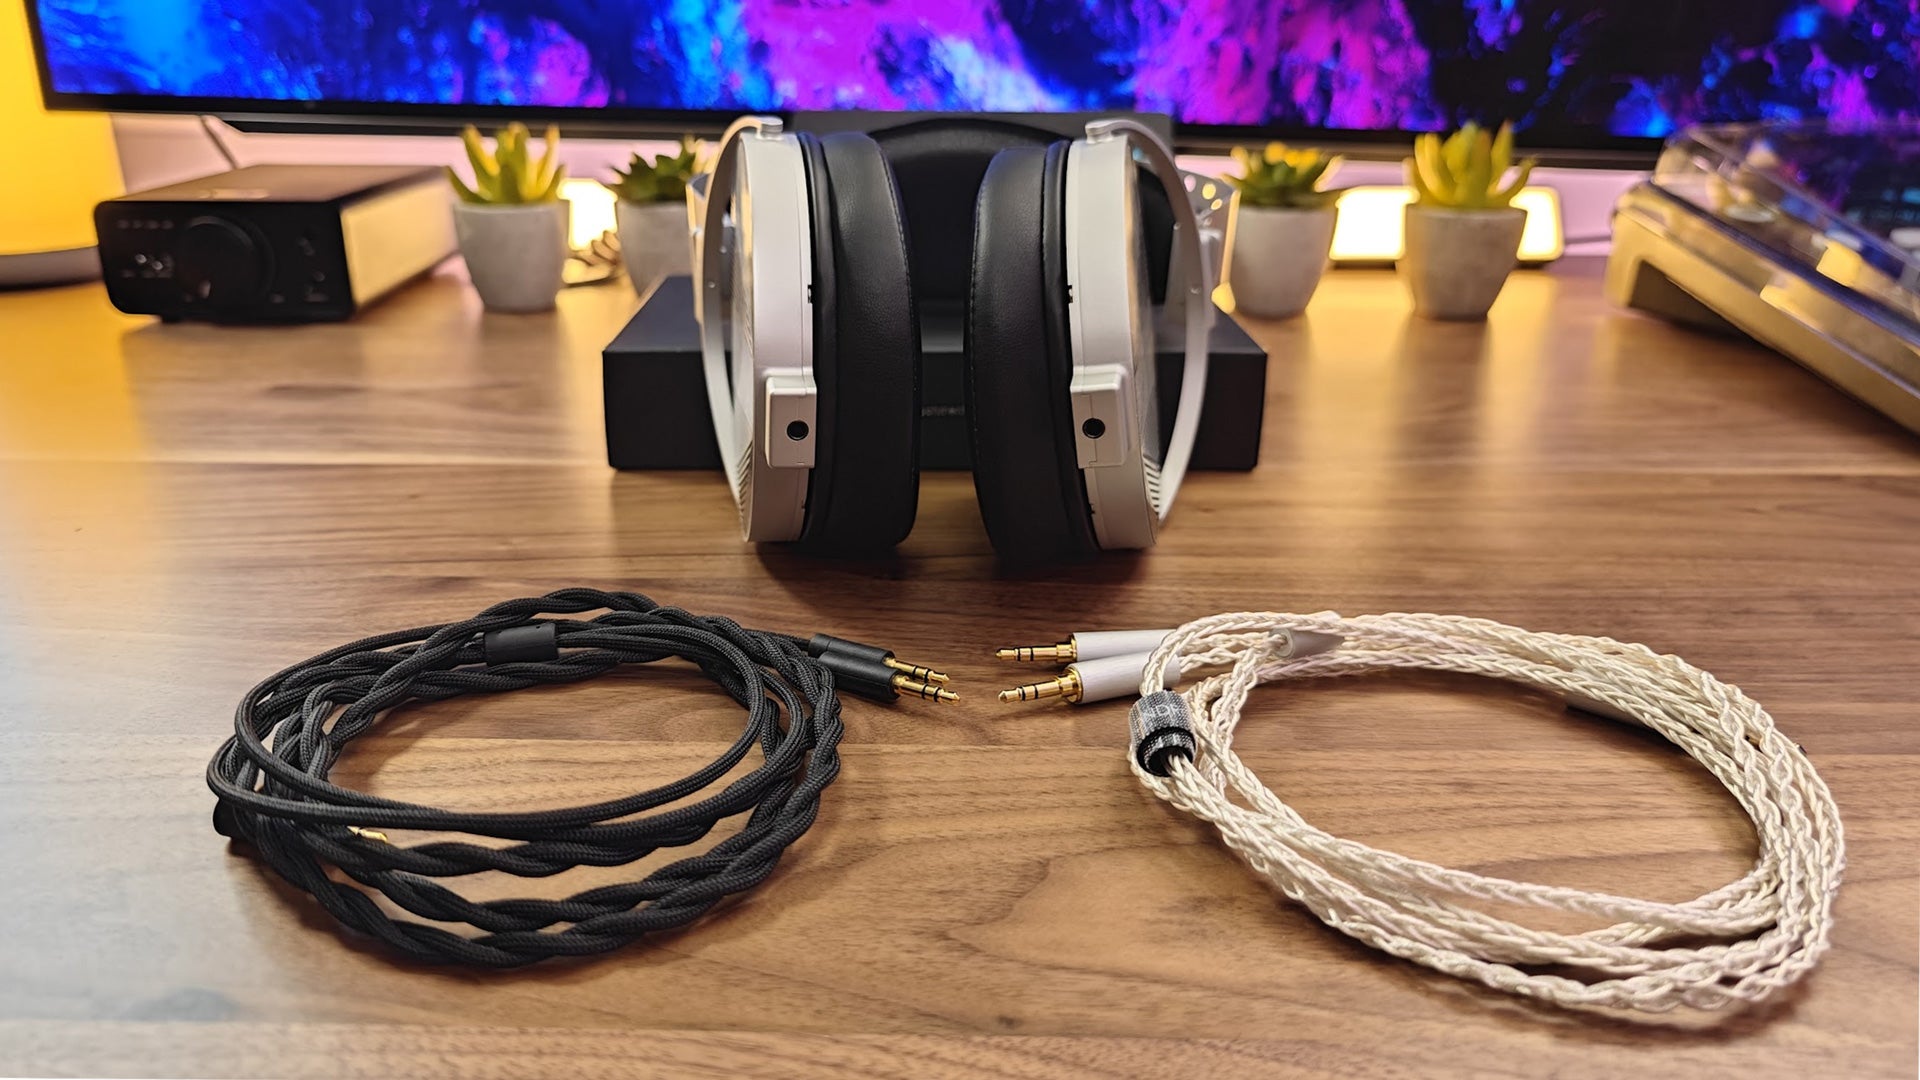 Whichever connector you like to use with your source, the Venus can connect you to your favorite songs.